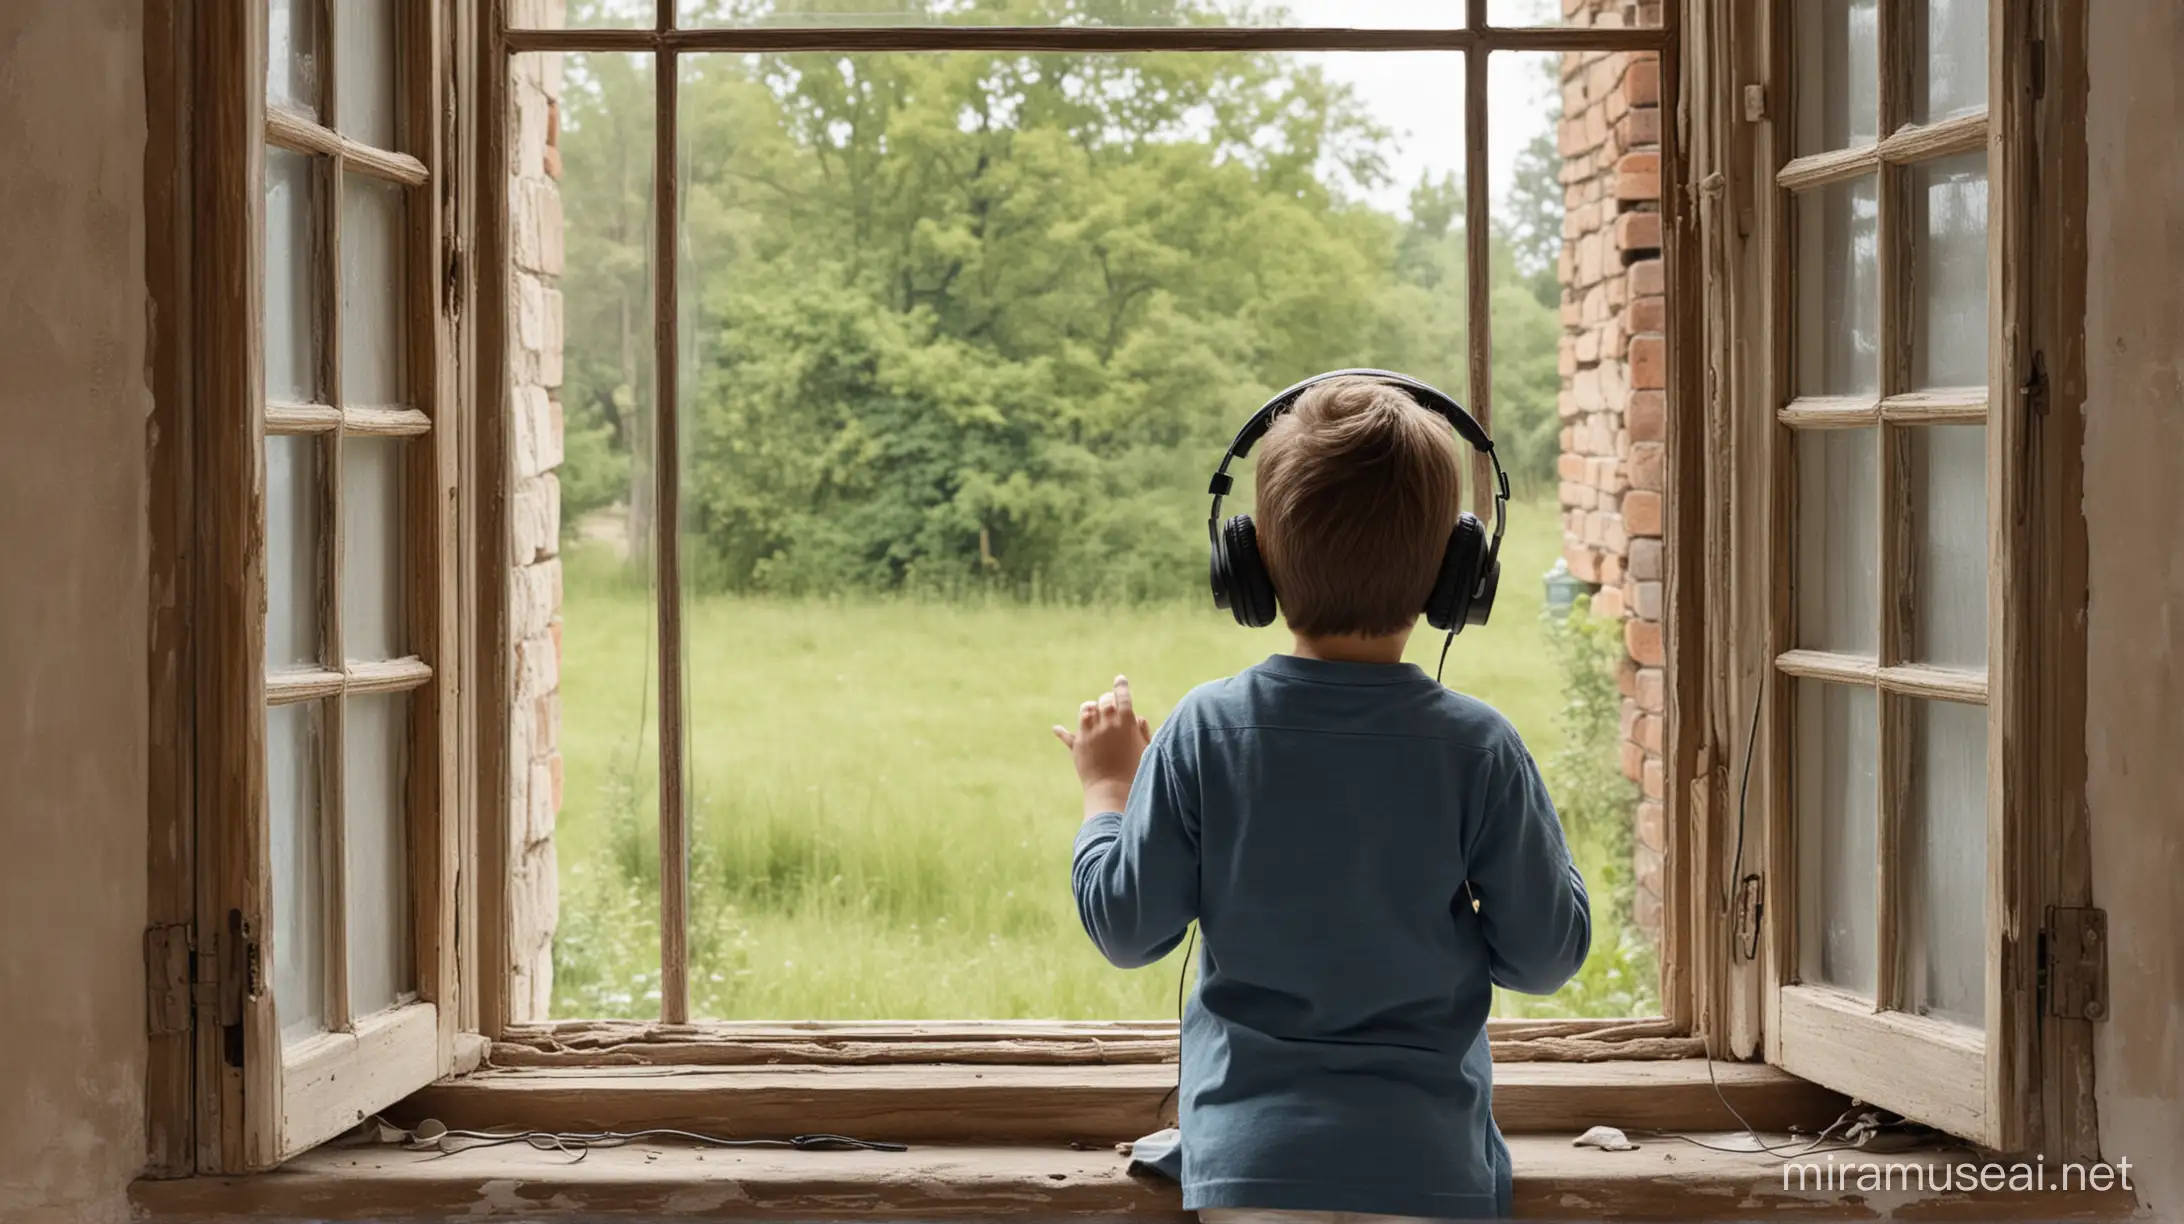 Back view of a young child wearing headphones staring out of an old traditional window that takes up most of the space in the image.
